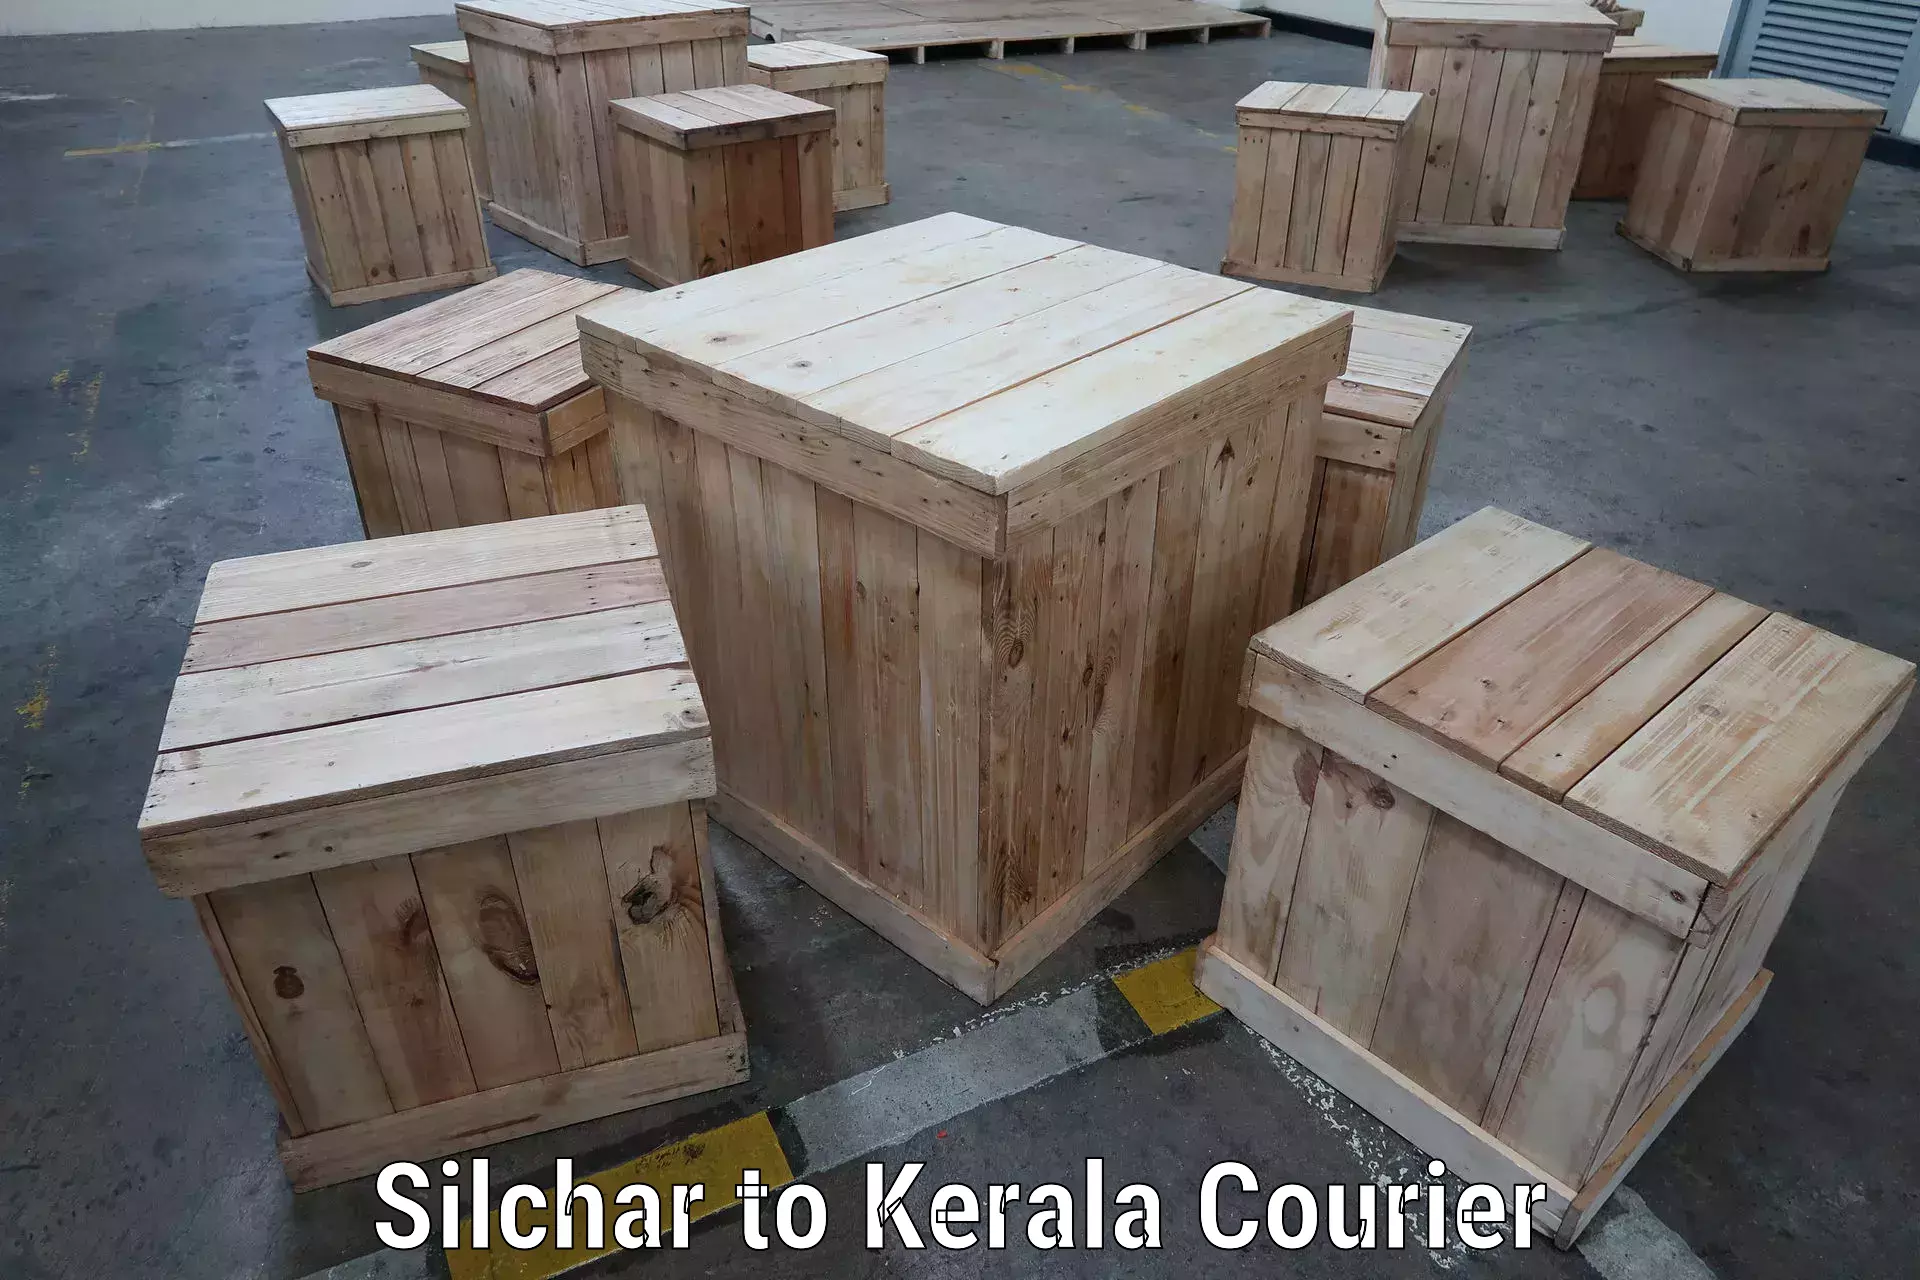 Seamless shipping experience Silchar to Vaikom